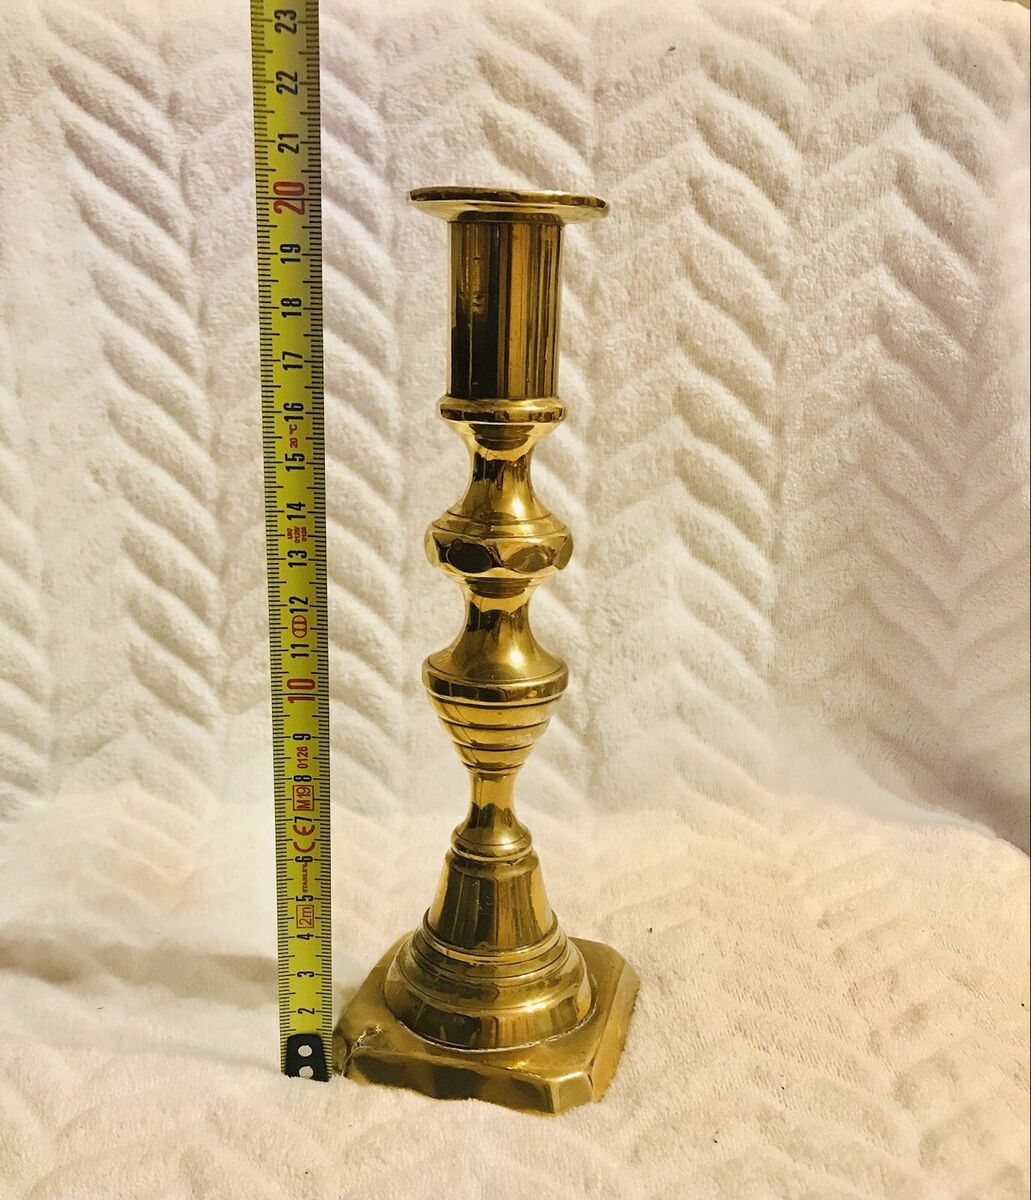 Vintage / Antique Solid Brass Candlesticks / Candle Holders 20 cm Tall